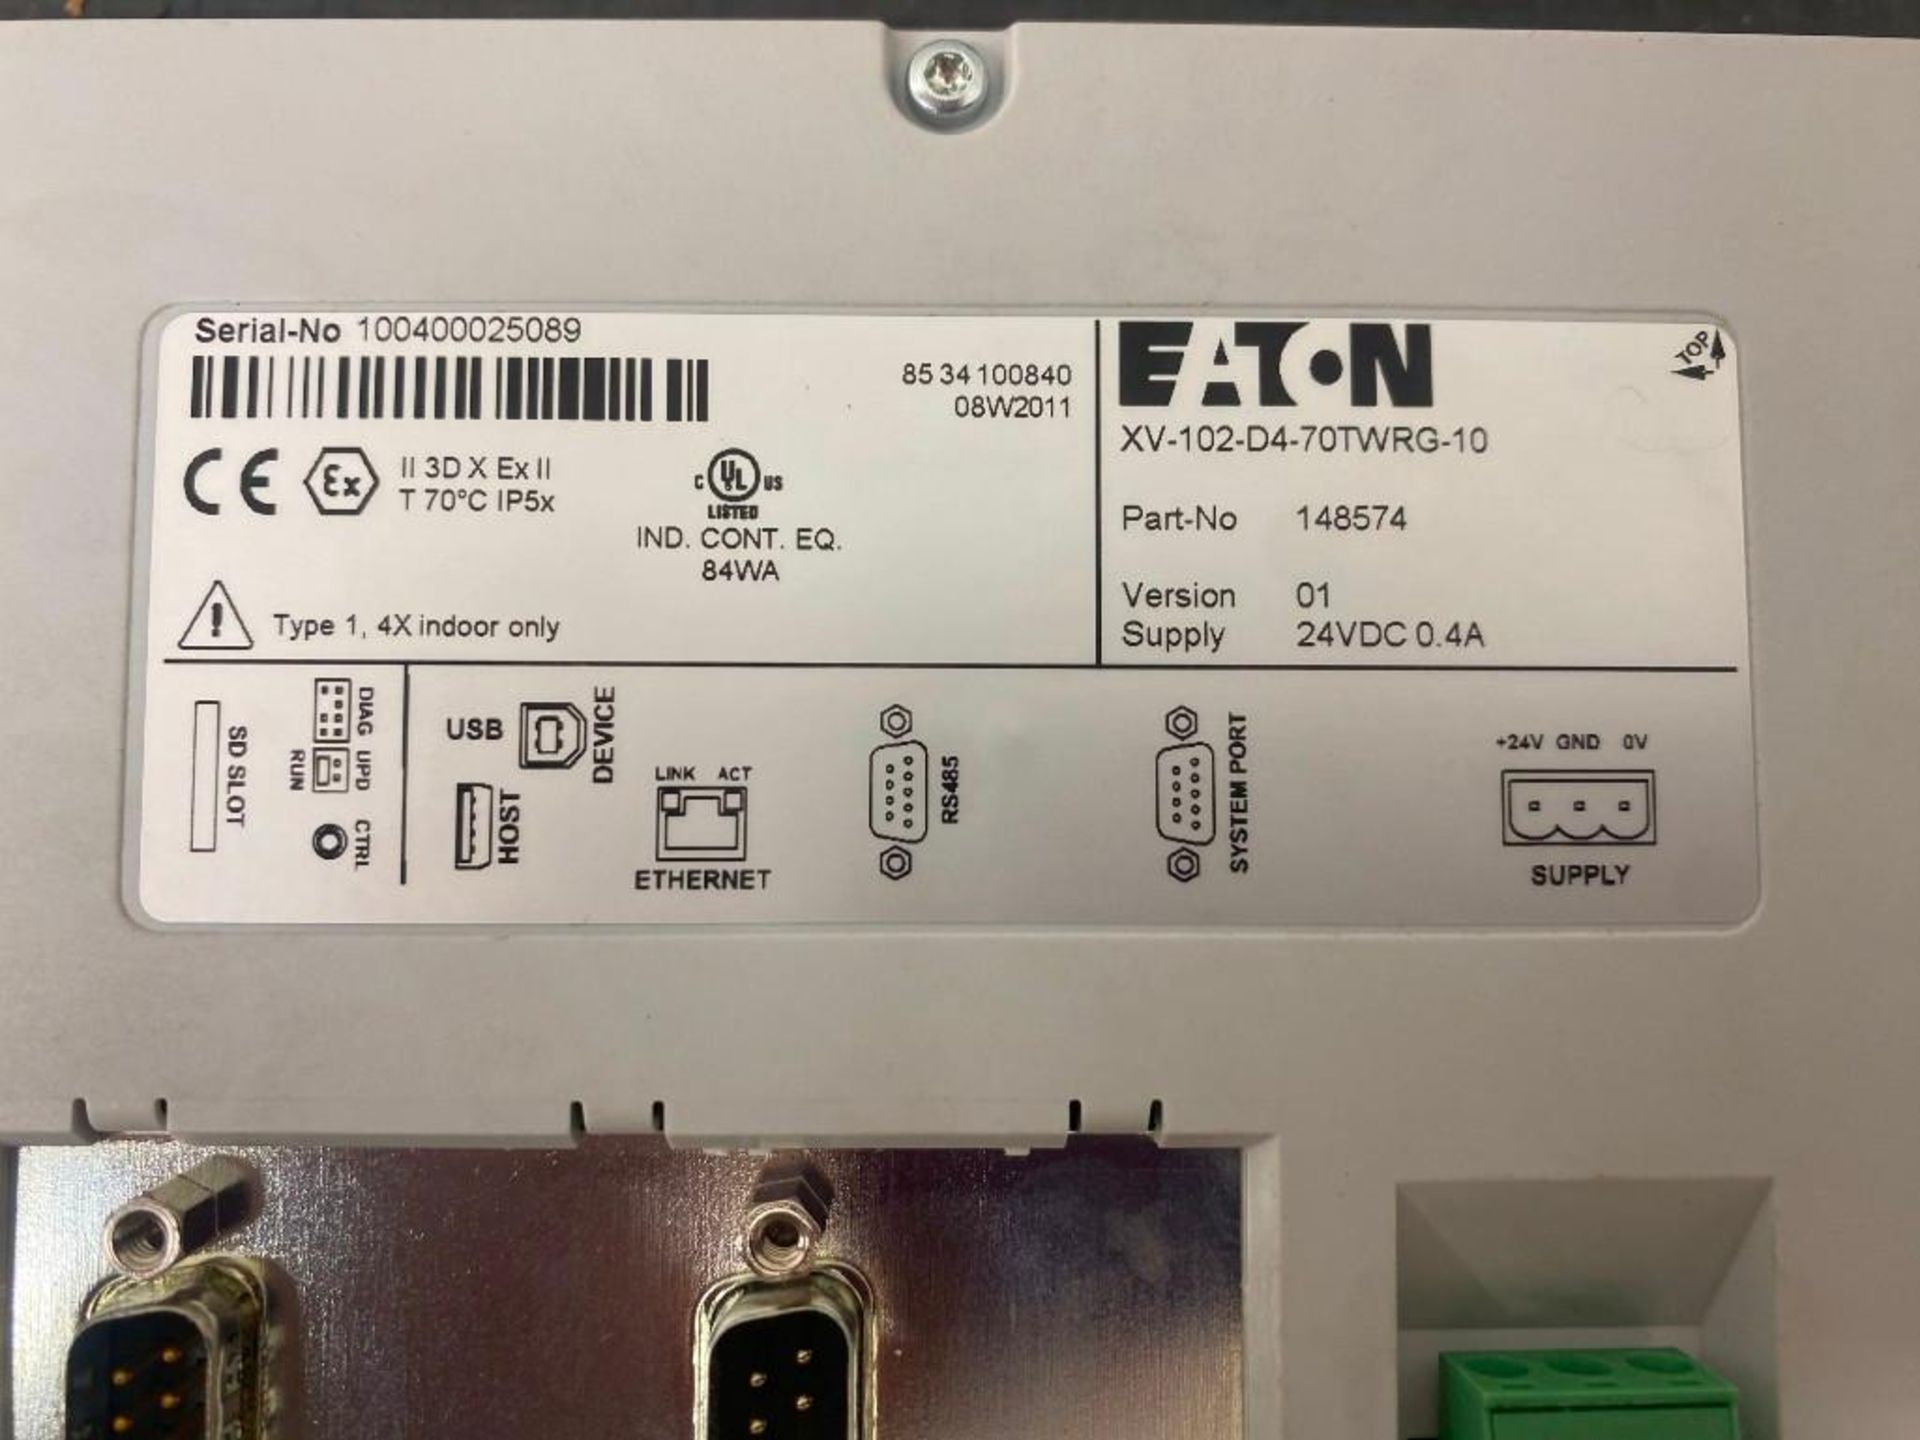 NEW WITHOUT ORIG. PACKAGING EATON OPERATOR PANEL XV-102-D4-70TWRG-10 - Image 4 of 4